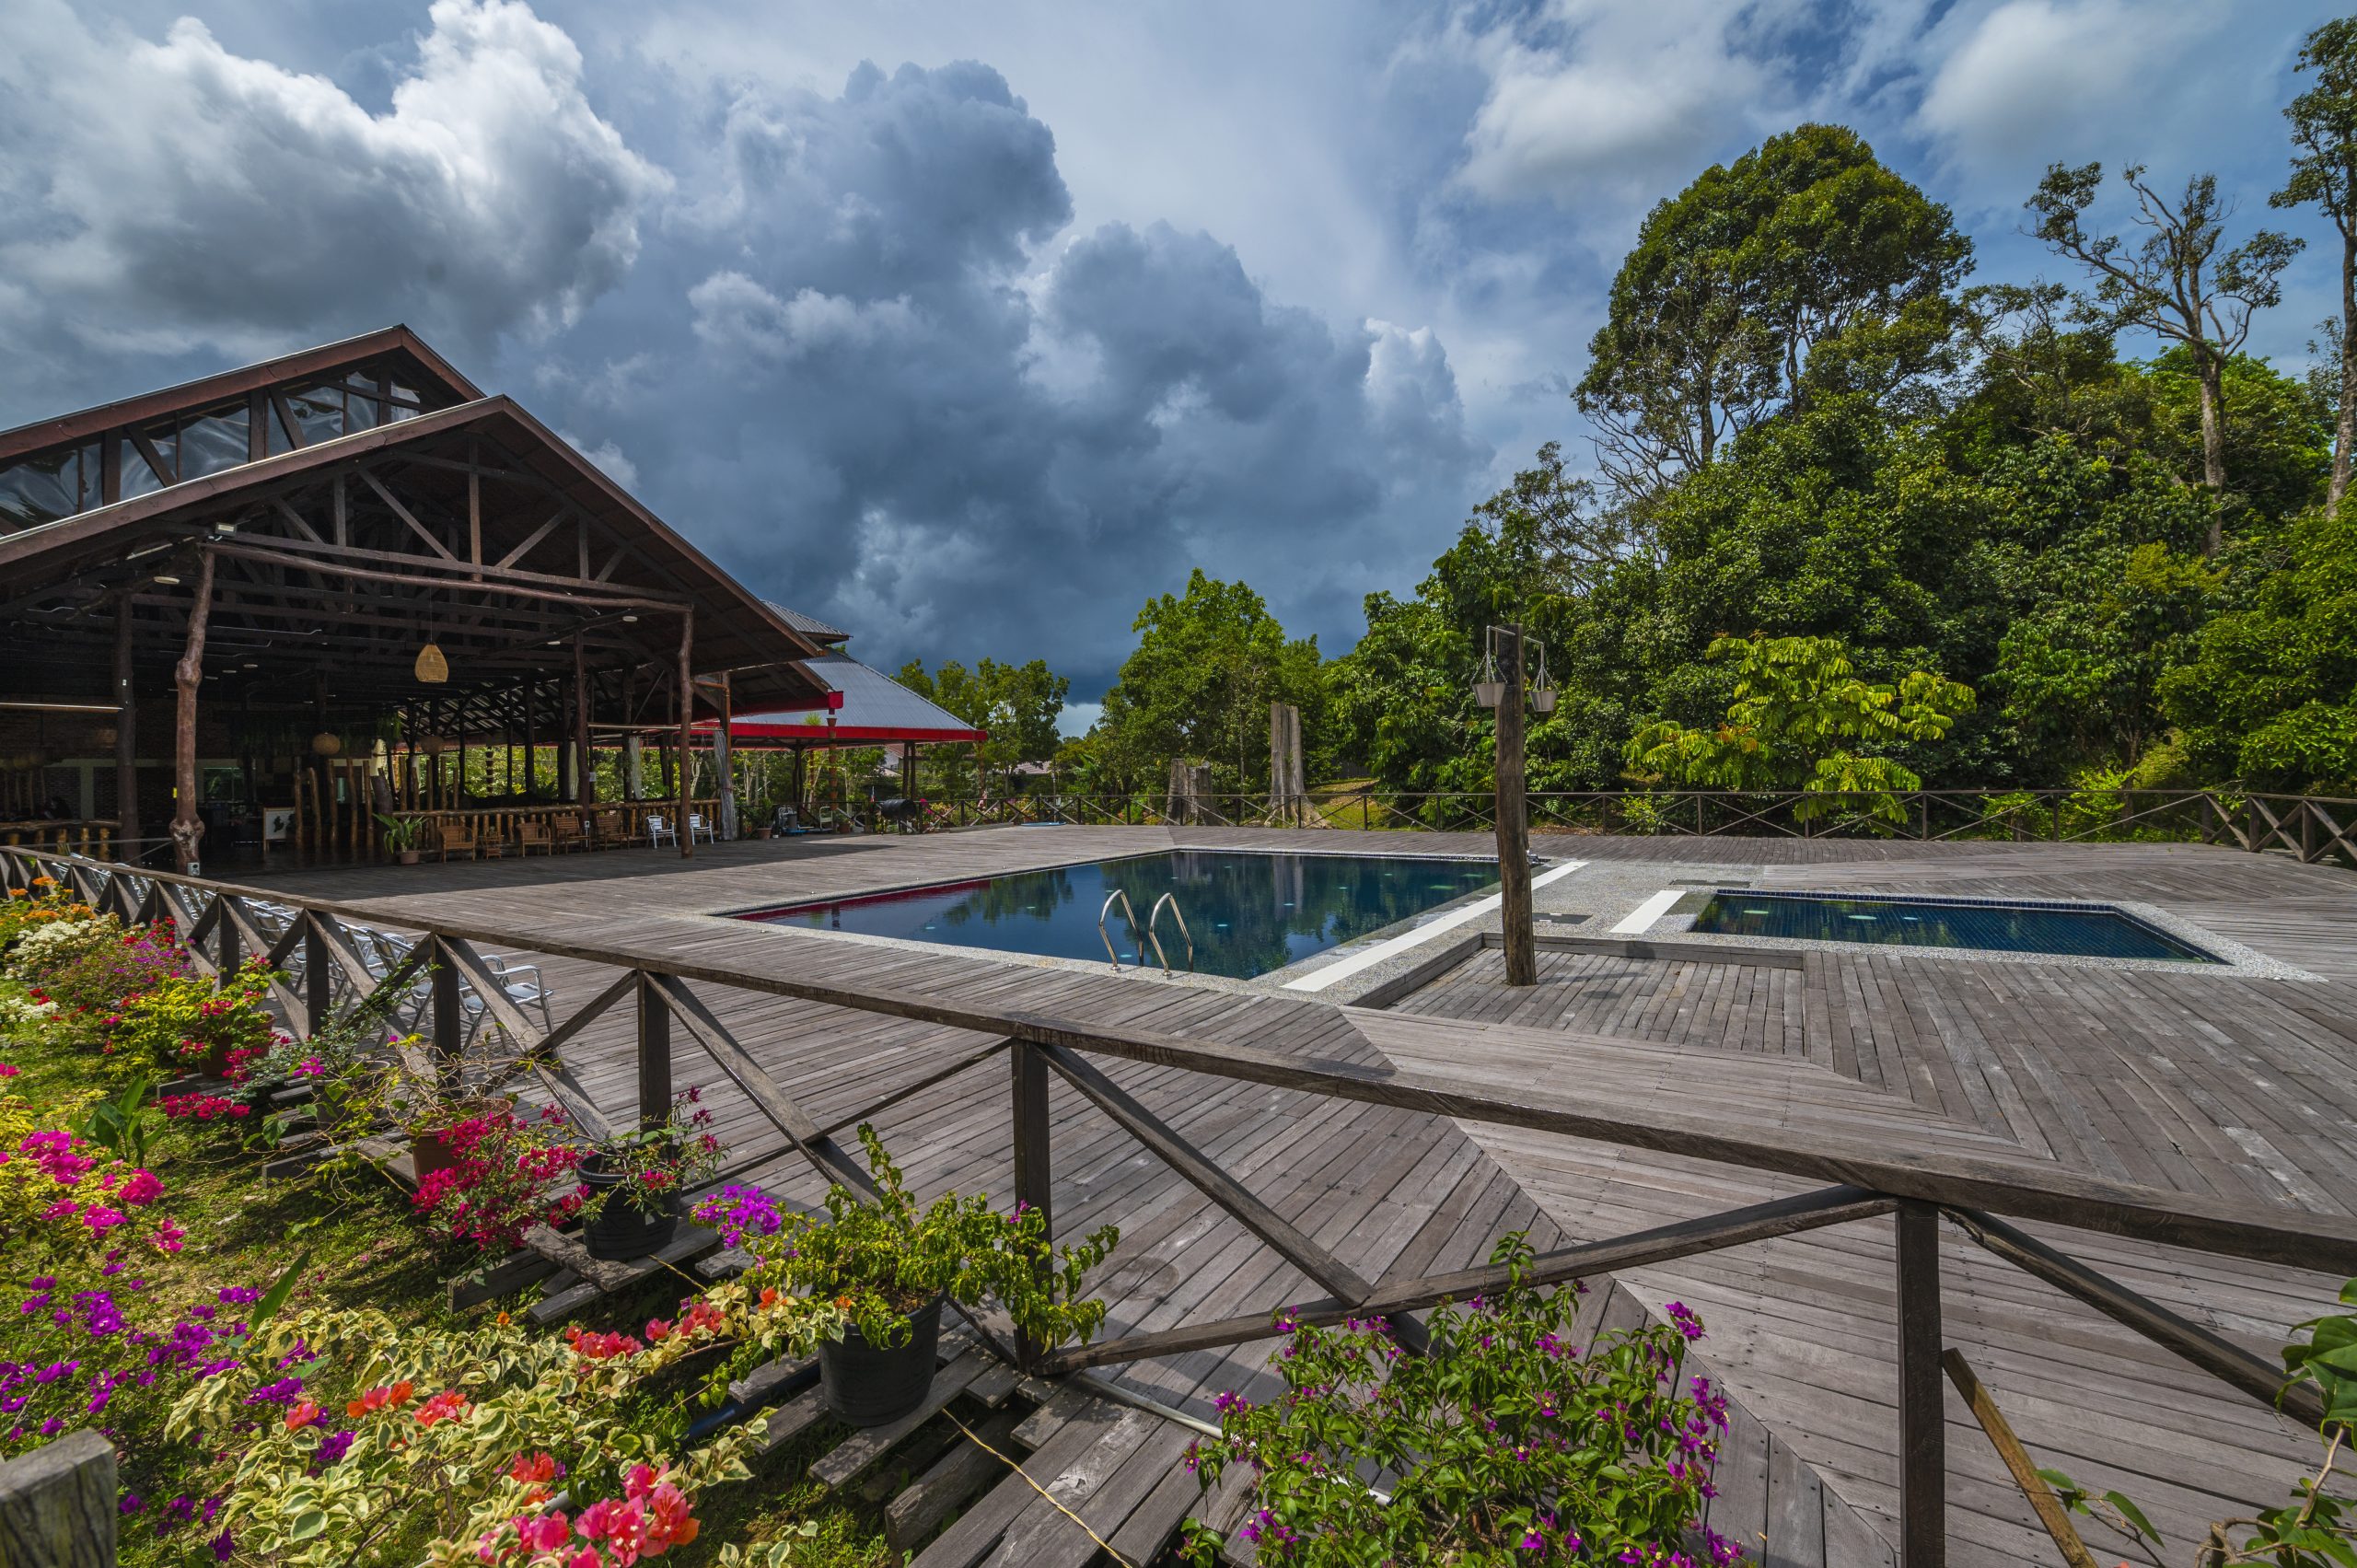 swimming pool surrounded by the nature at borneo sepilok rainforest resort